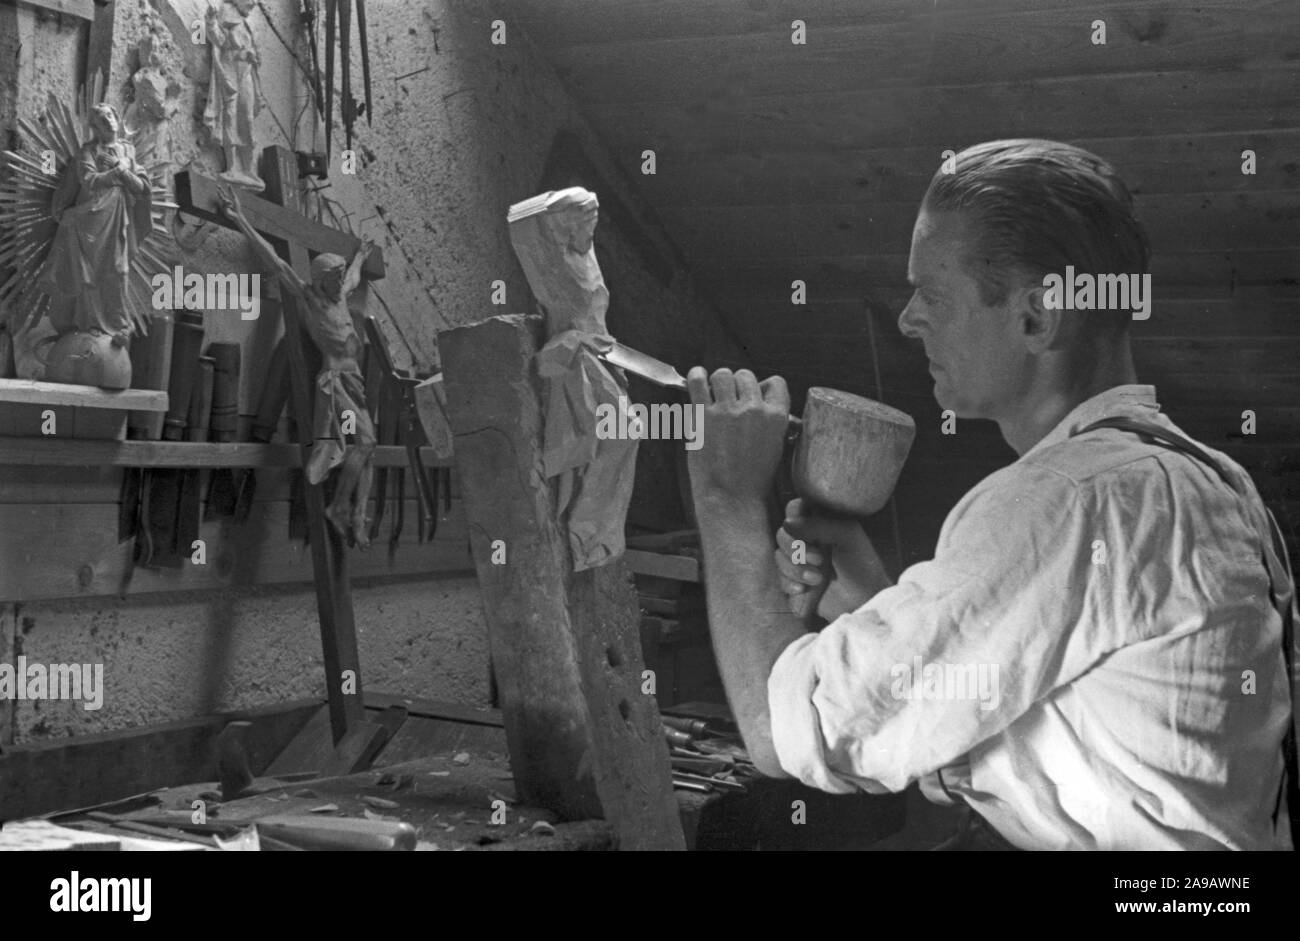 A wood carver creating a statuette, Germany 1940s. Stock Photo